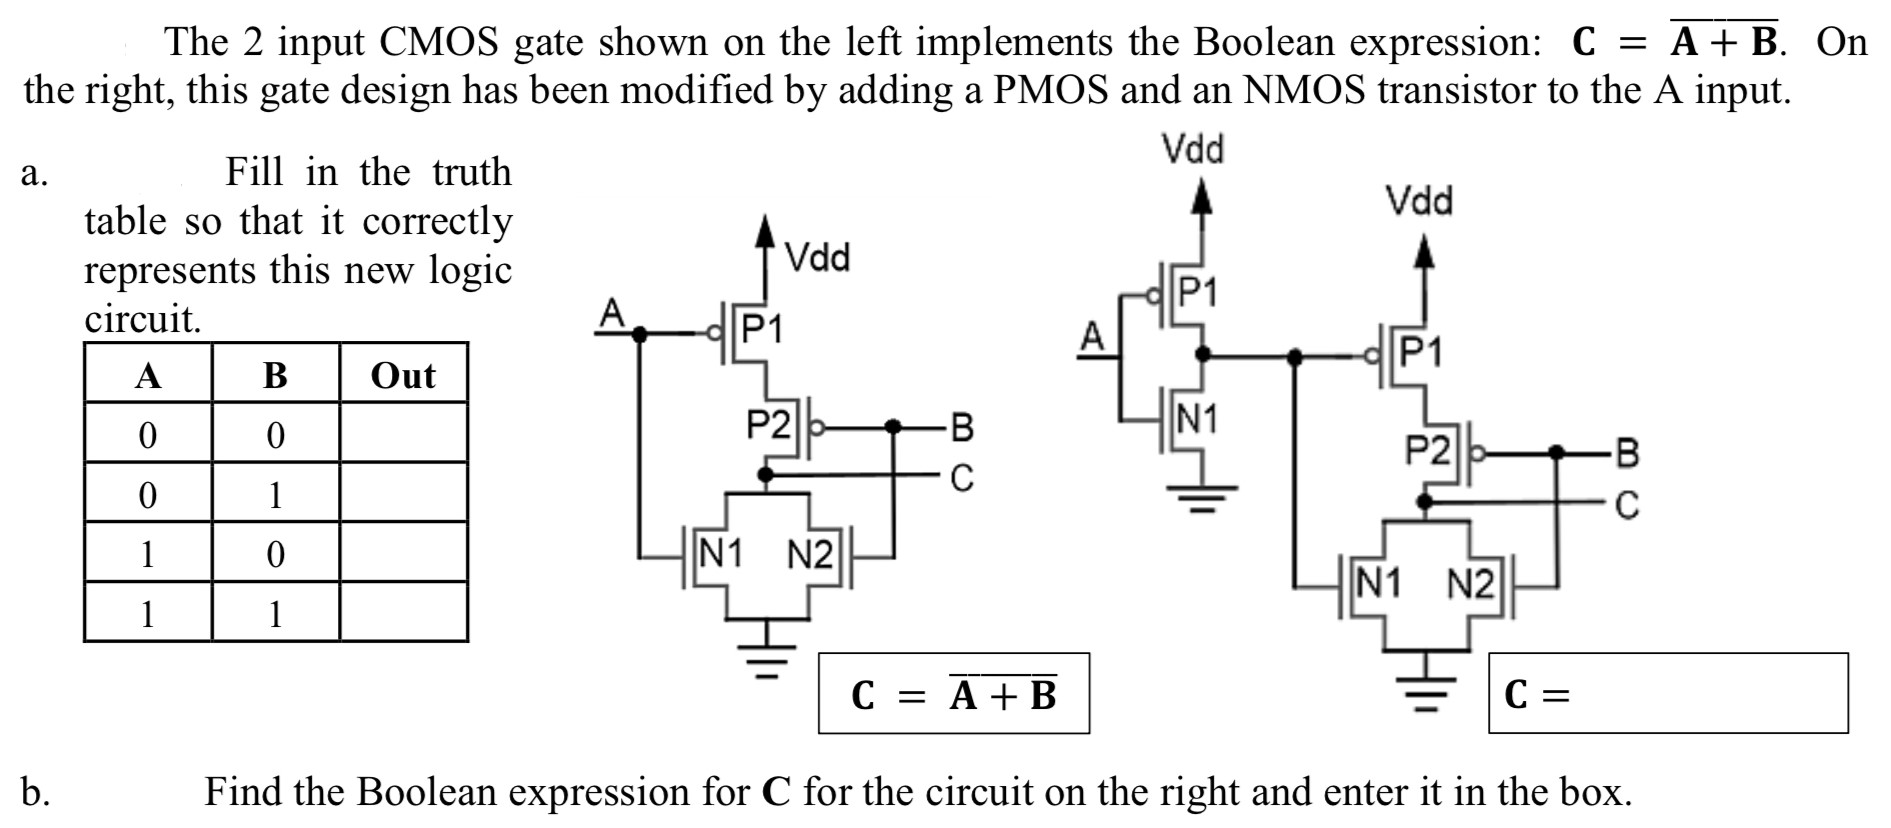 The 2 input CMOS gate shown on the left implements the Boolean expression: C = A + B. On the right, this gate design has been modified by adding a PMOS and an NMOS transistor to the A input. a. Fill in the truth table so that it correctly represents this new logic circuit. b. Find the Boolean expression for C for the circuit on the right and enter it in the box. 